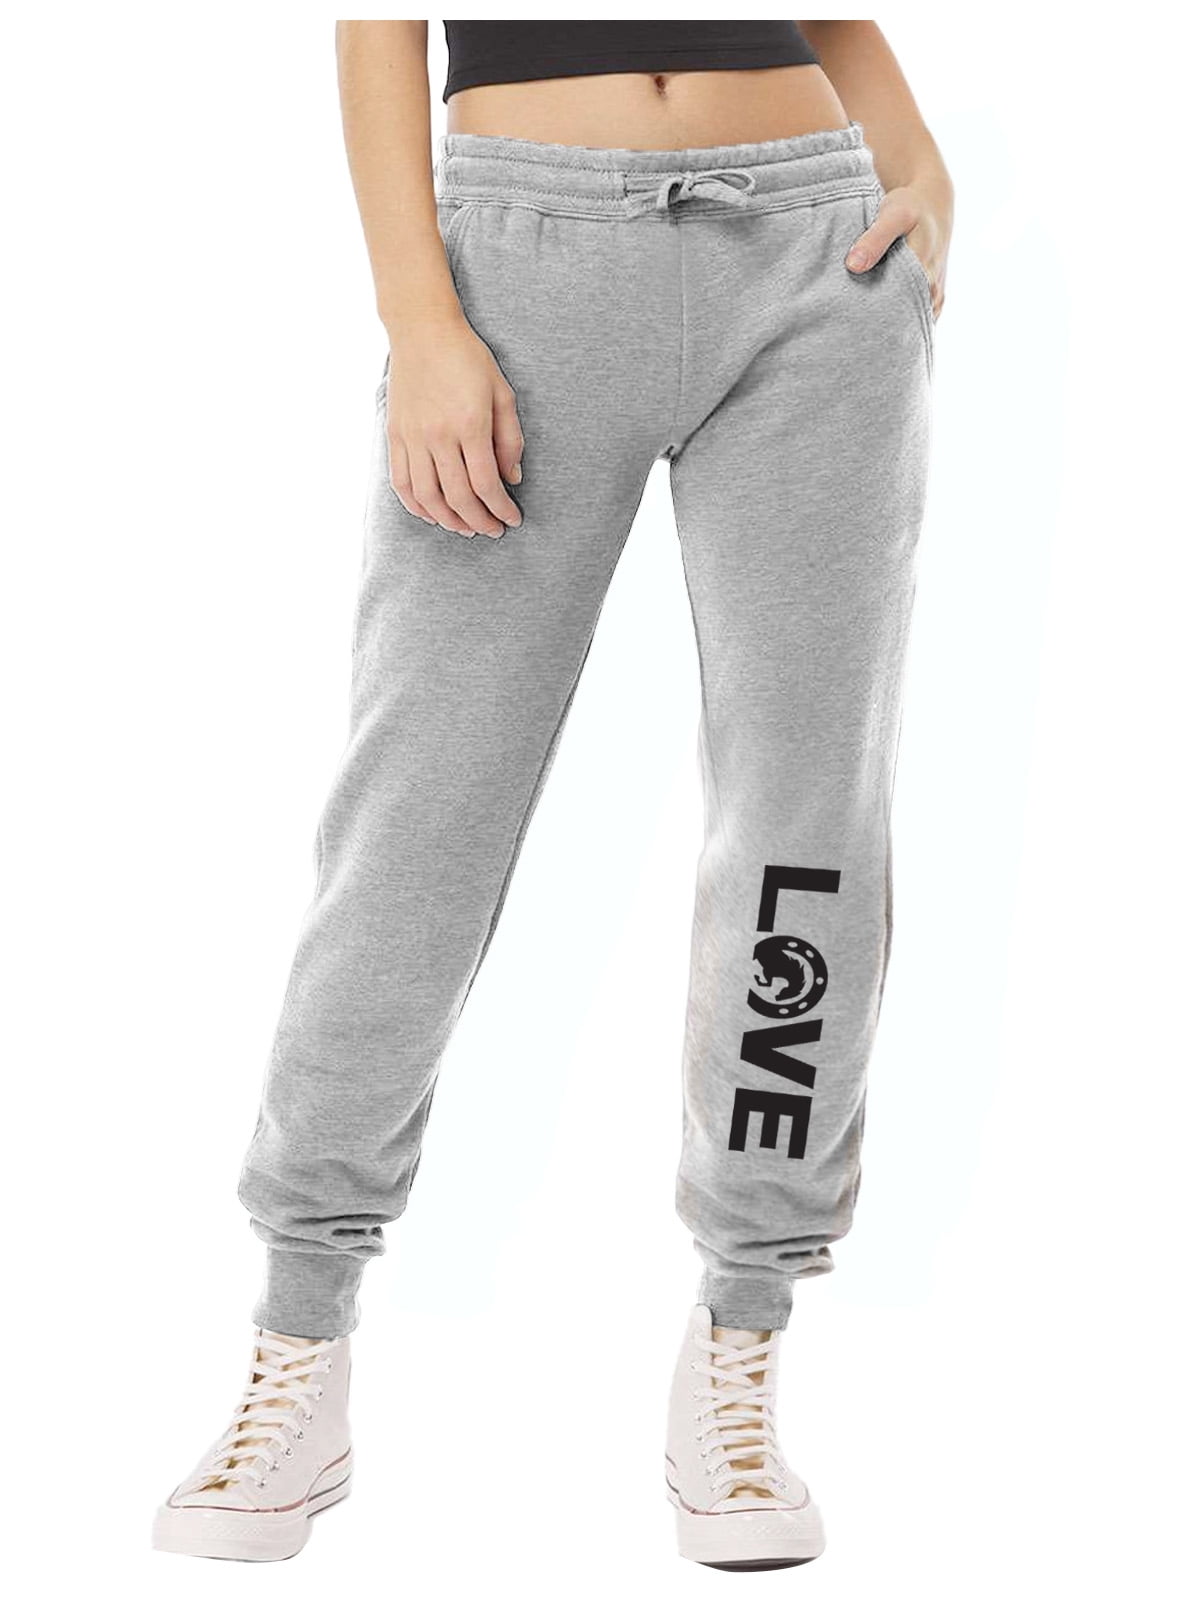 Horse Lover Joggers for Women Sweatpants for Teen Girls Horses Fleece Joggers  Small Gray 